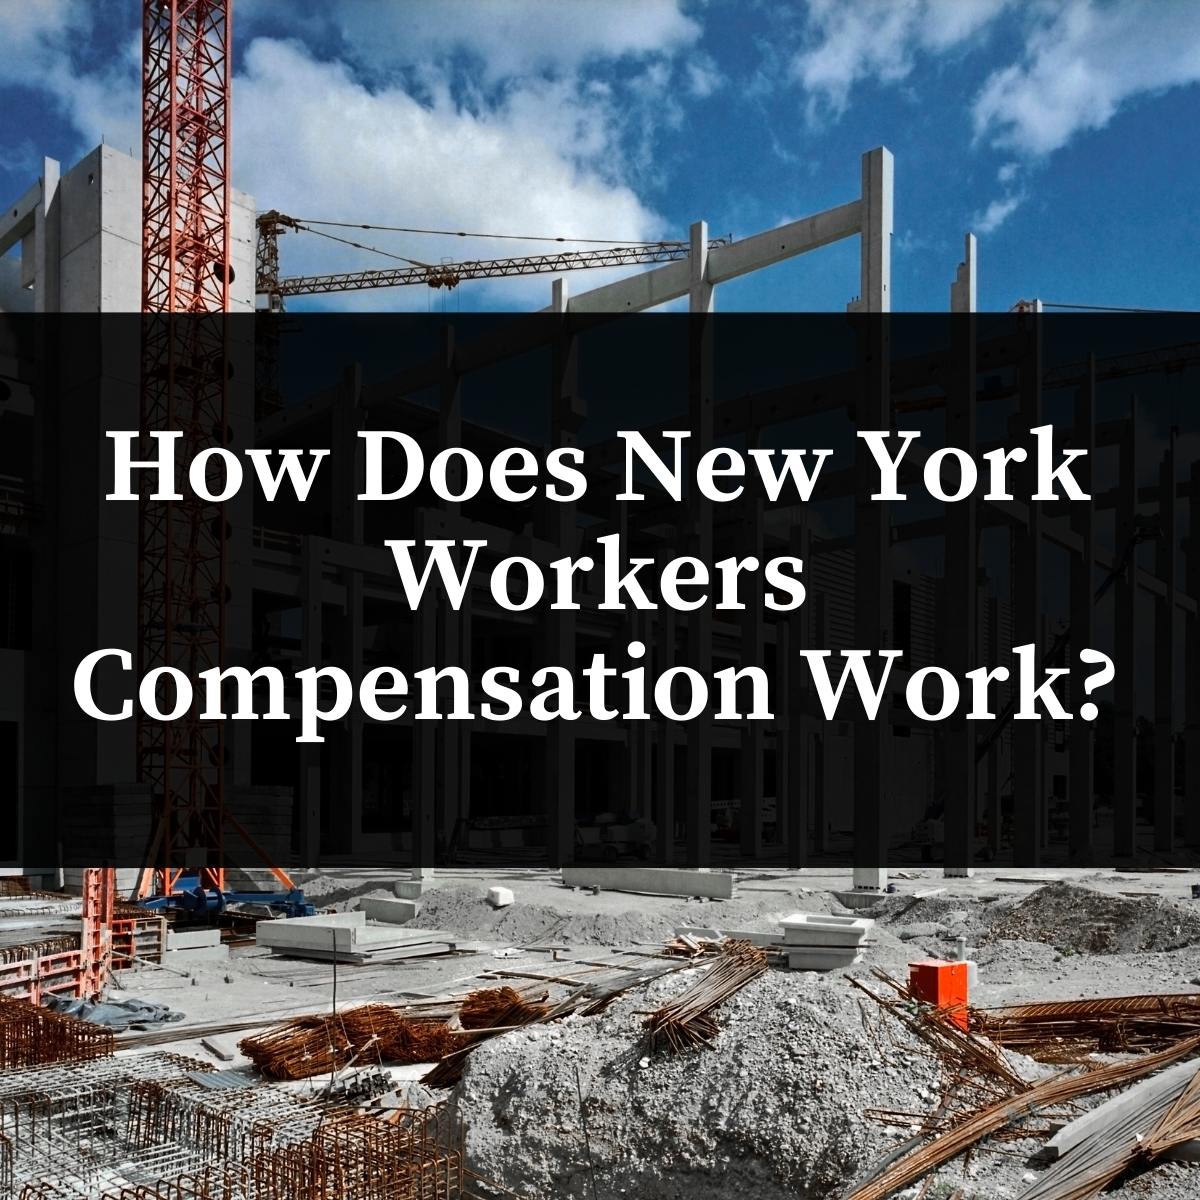 How Does New York Workers Compensation Work?